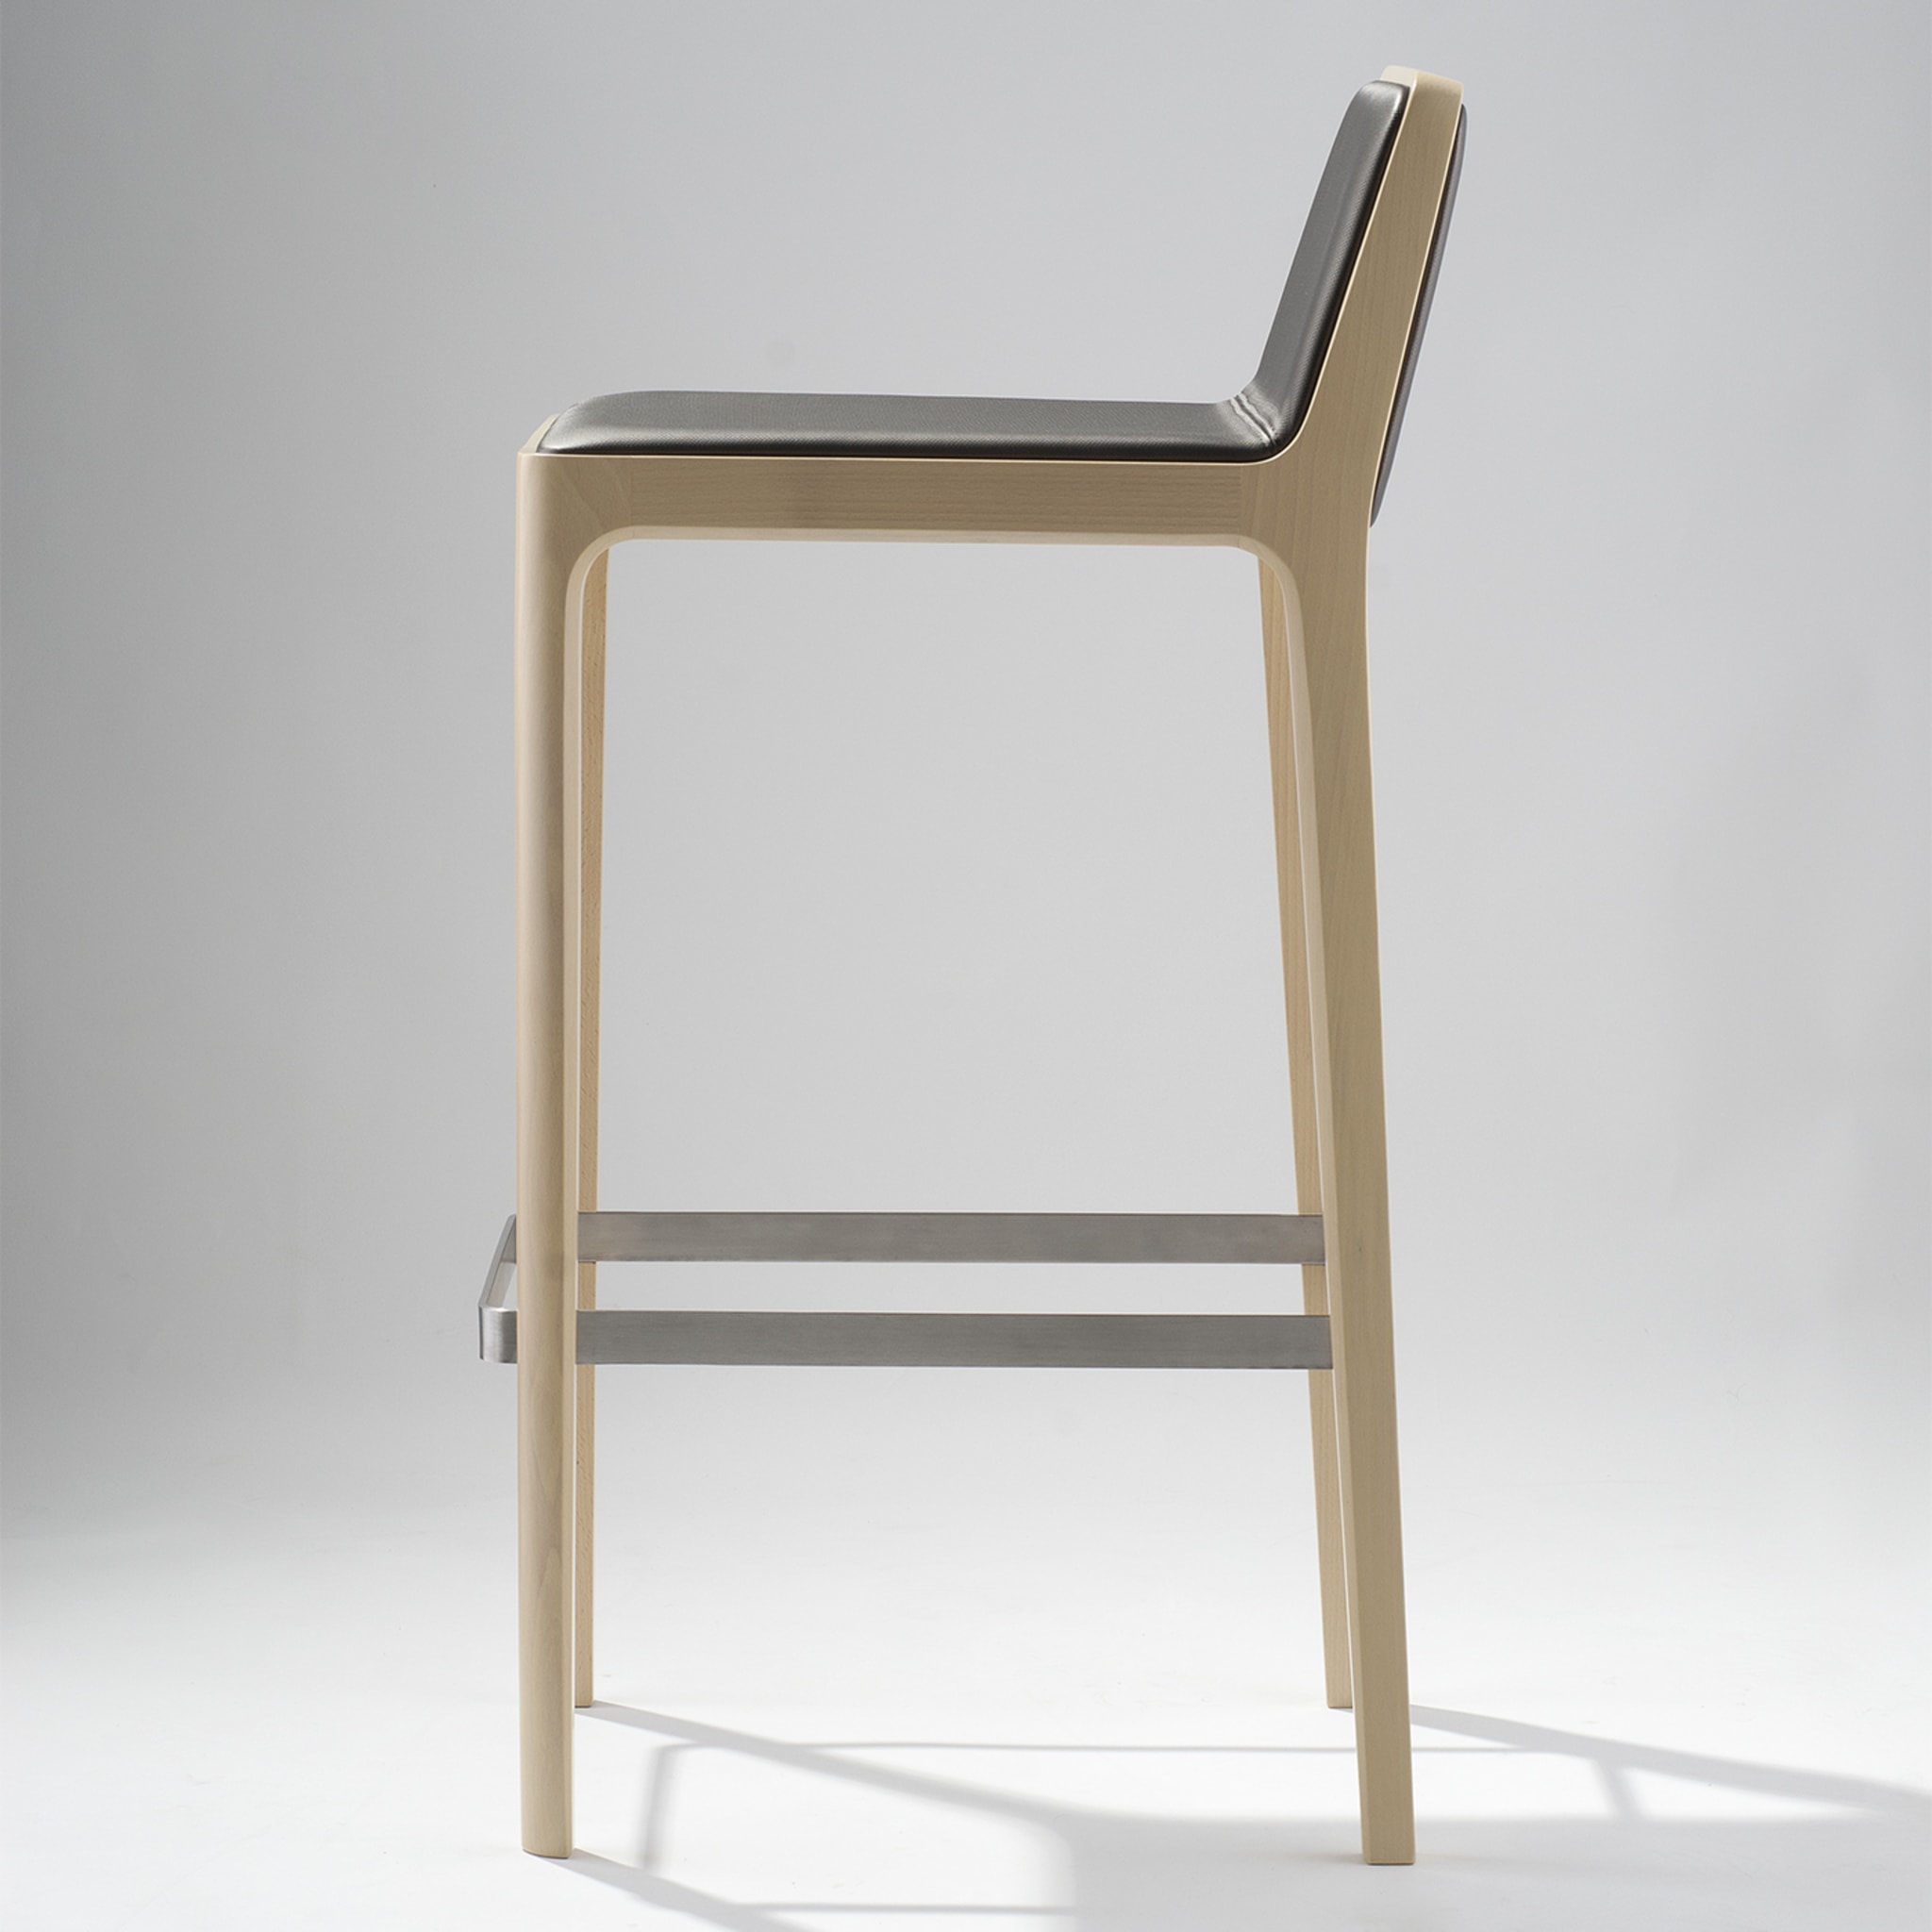 Tip Tap 383 Bar Stool by Claudio Perin - Alternative view 2